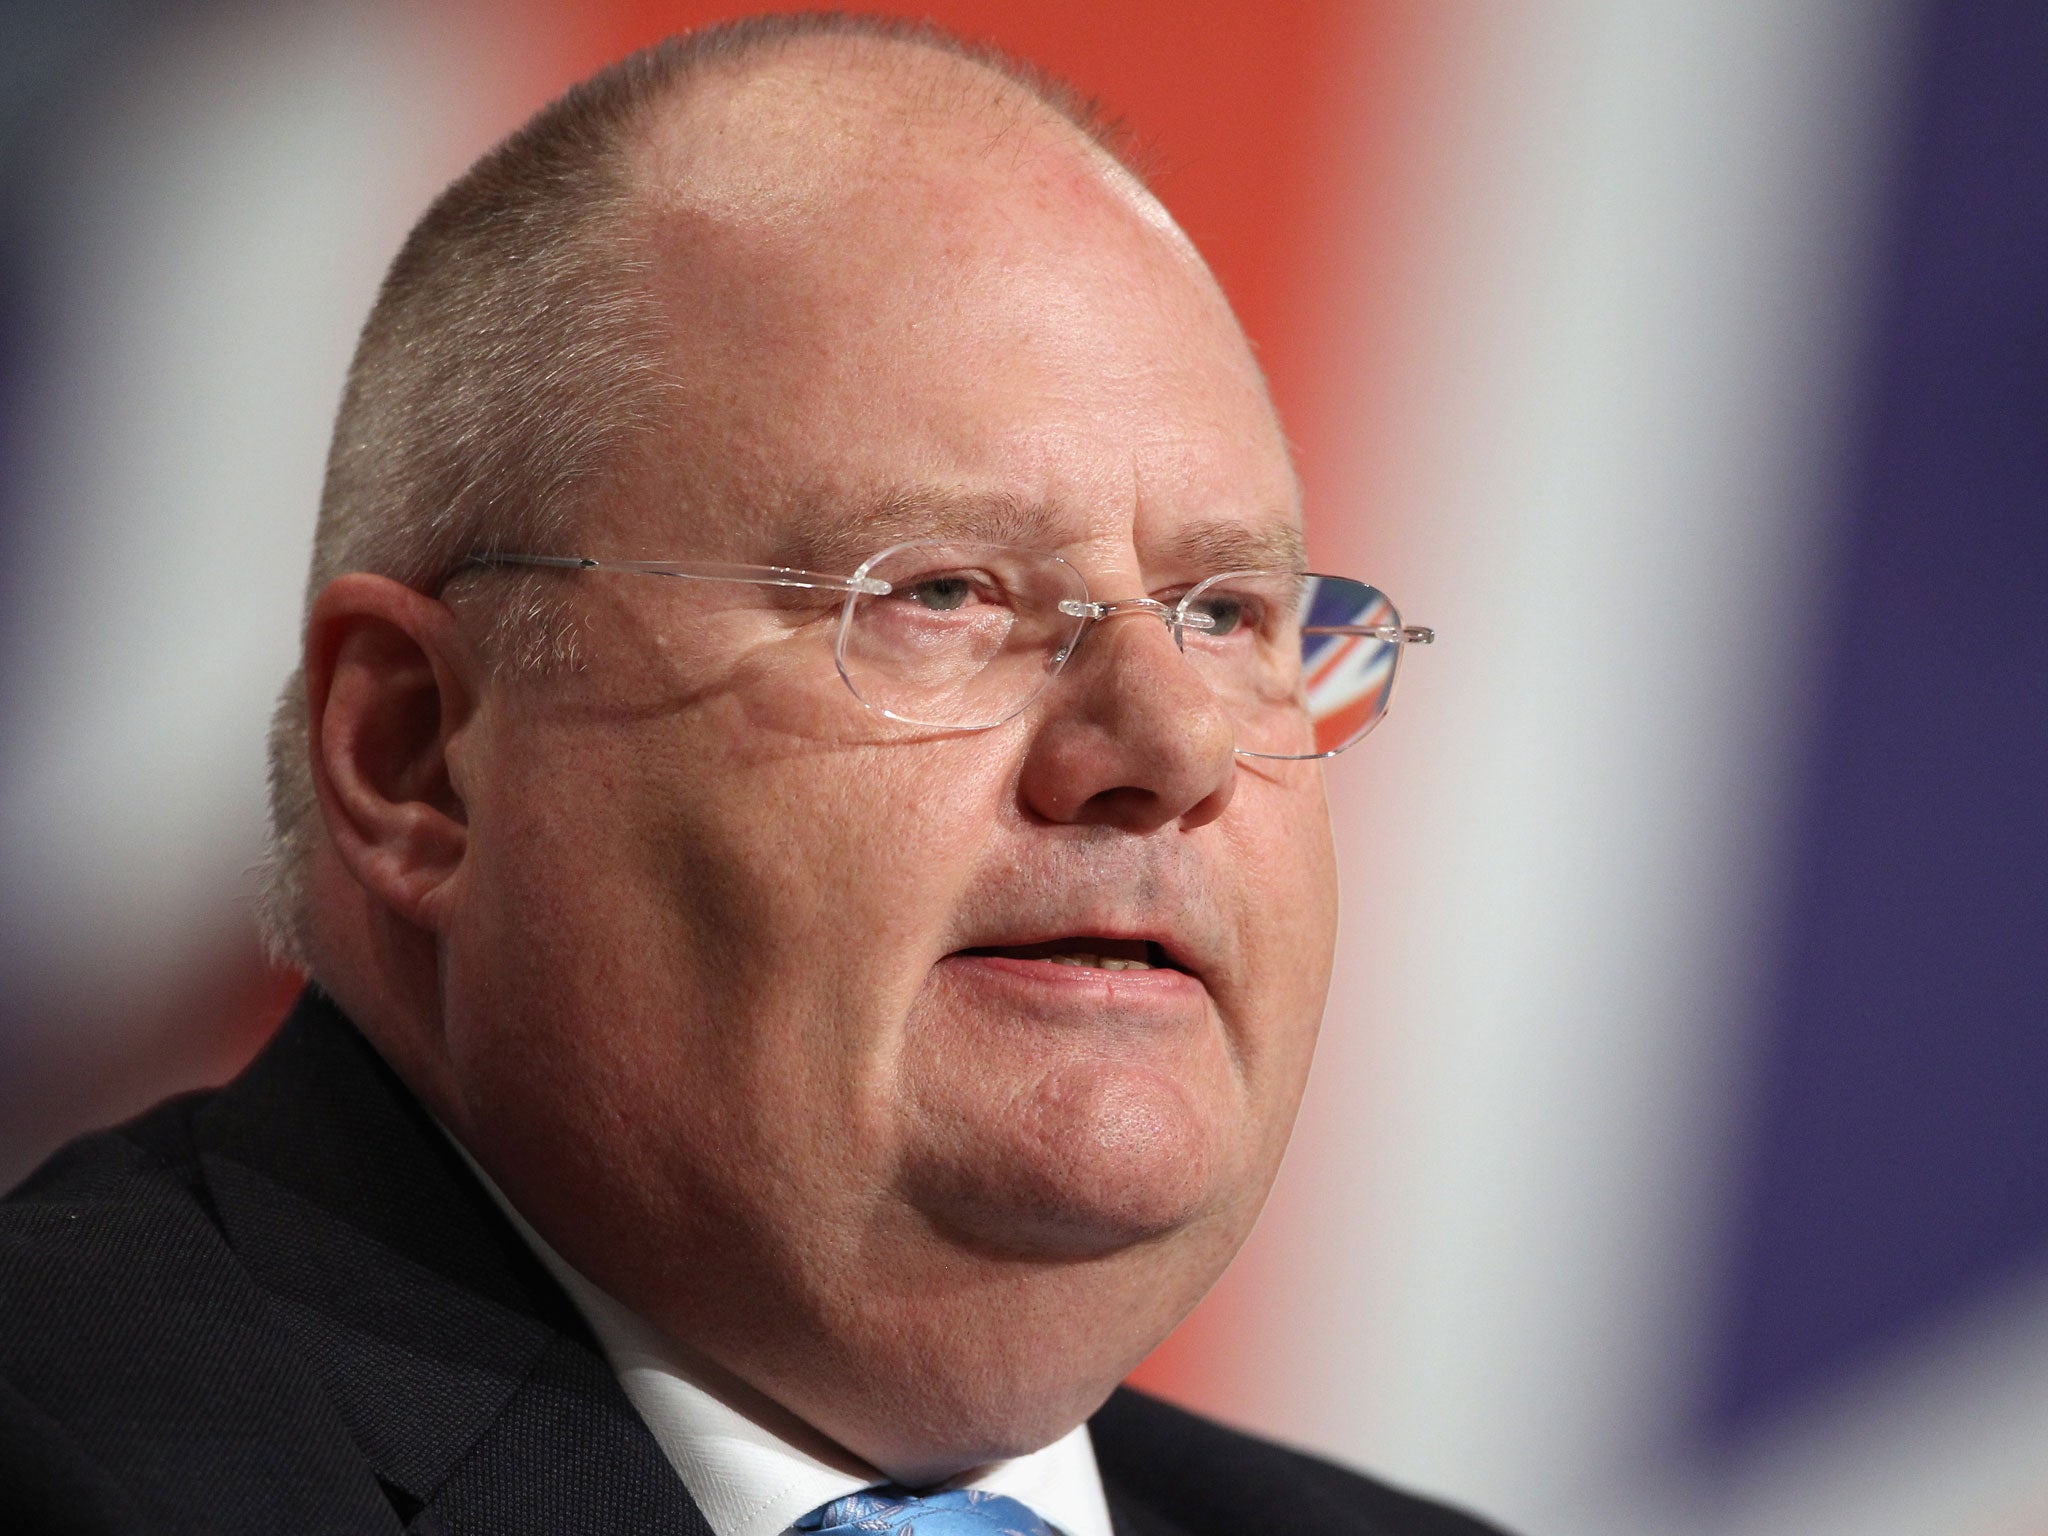 Communities and Local Government Secretary, Eric Pickles, speaks at the Conservative Party Conference at the International Convention Centre on October 3, 2010 in Birmingham, England.